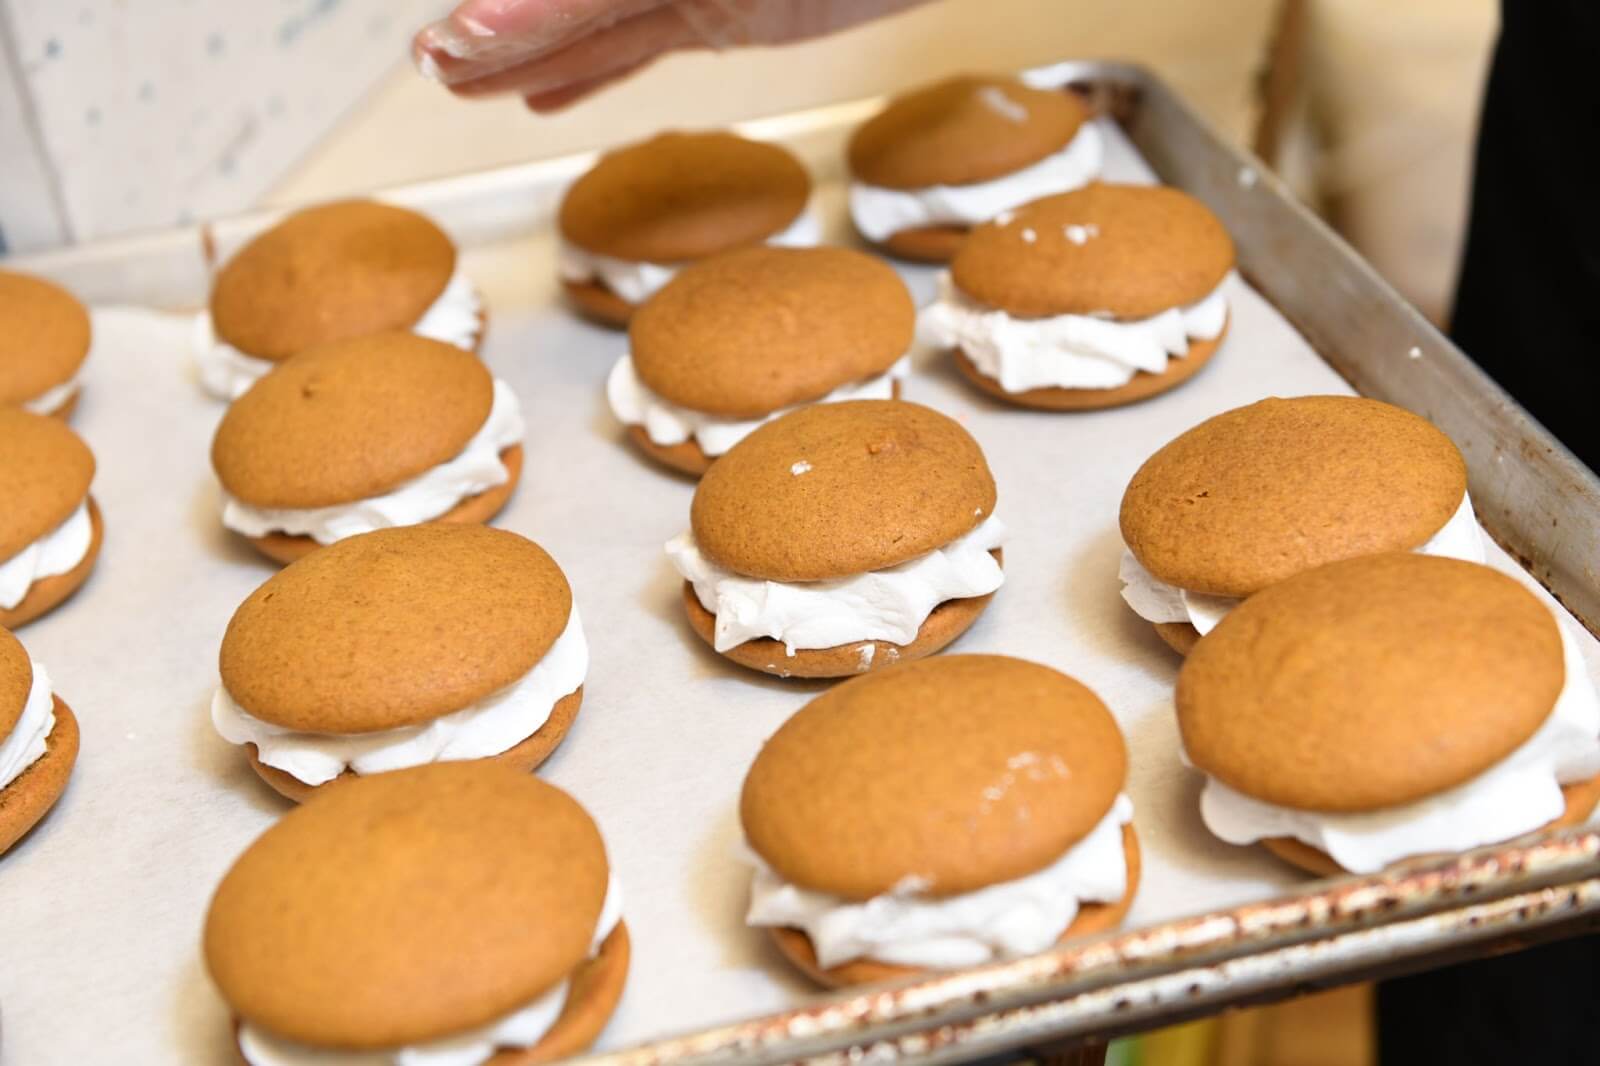 Amish-baked pumpkin whoopie pies on a baking sheet